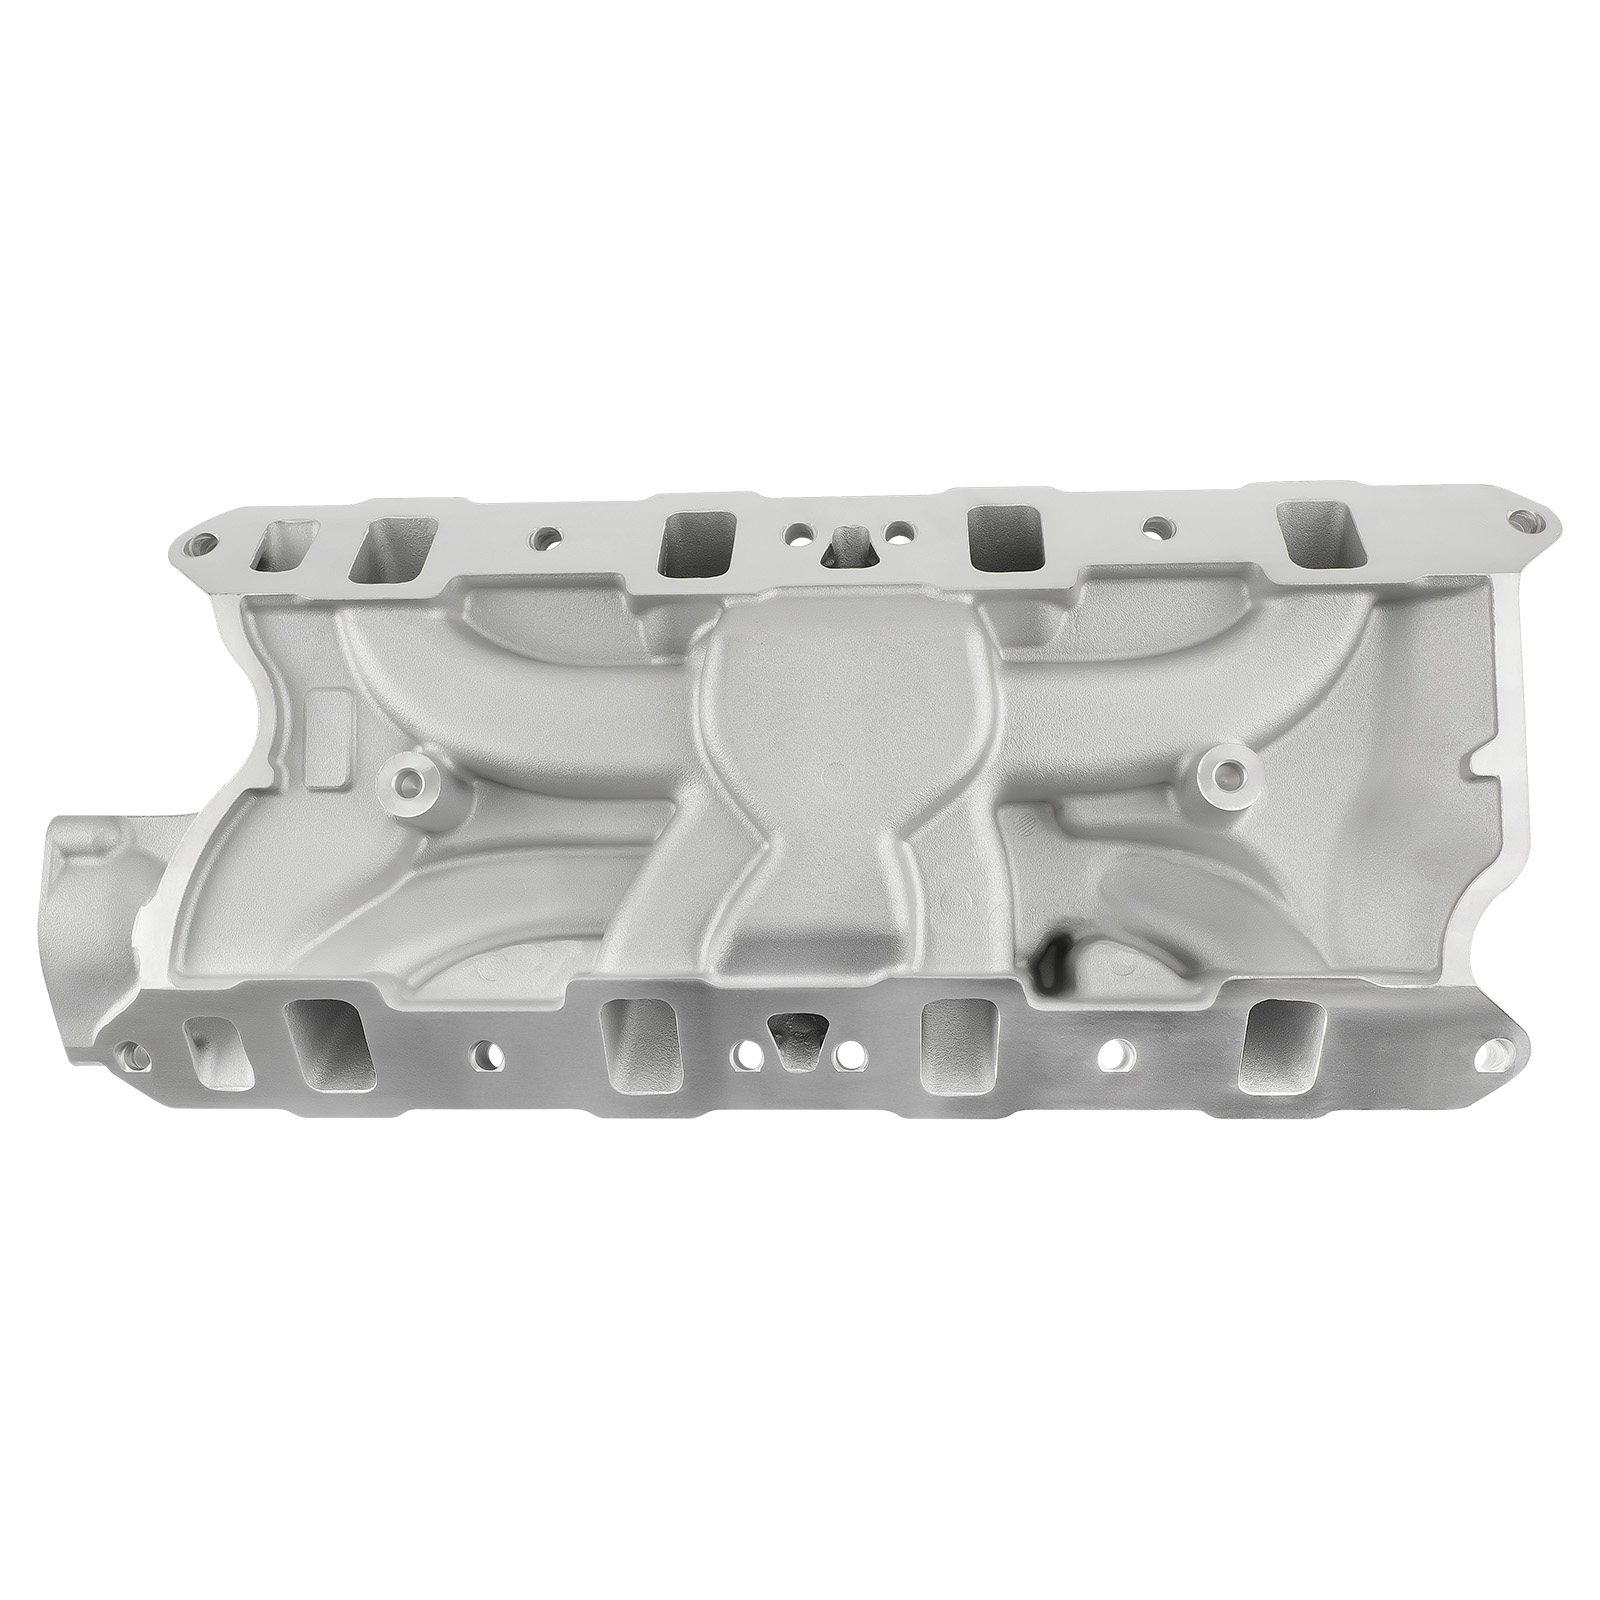 Engine Intake Manifold fit for Ford Small Block 289 302 High Rise Dual Plane